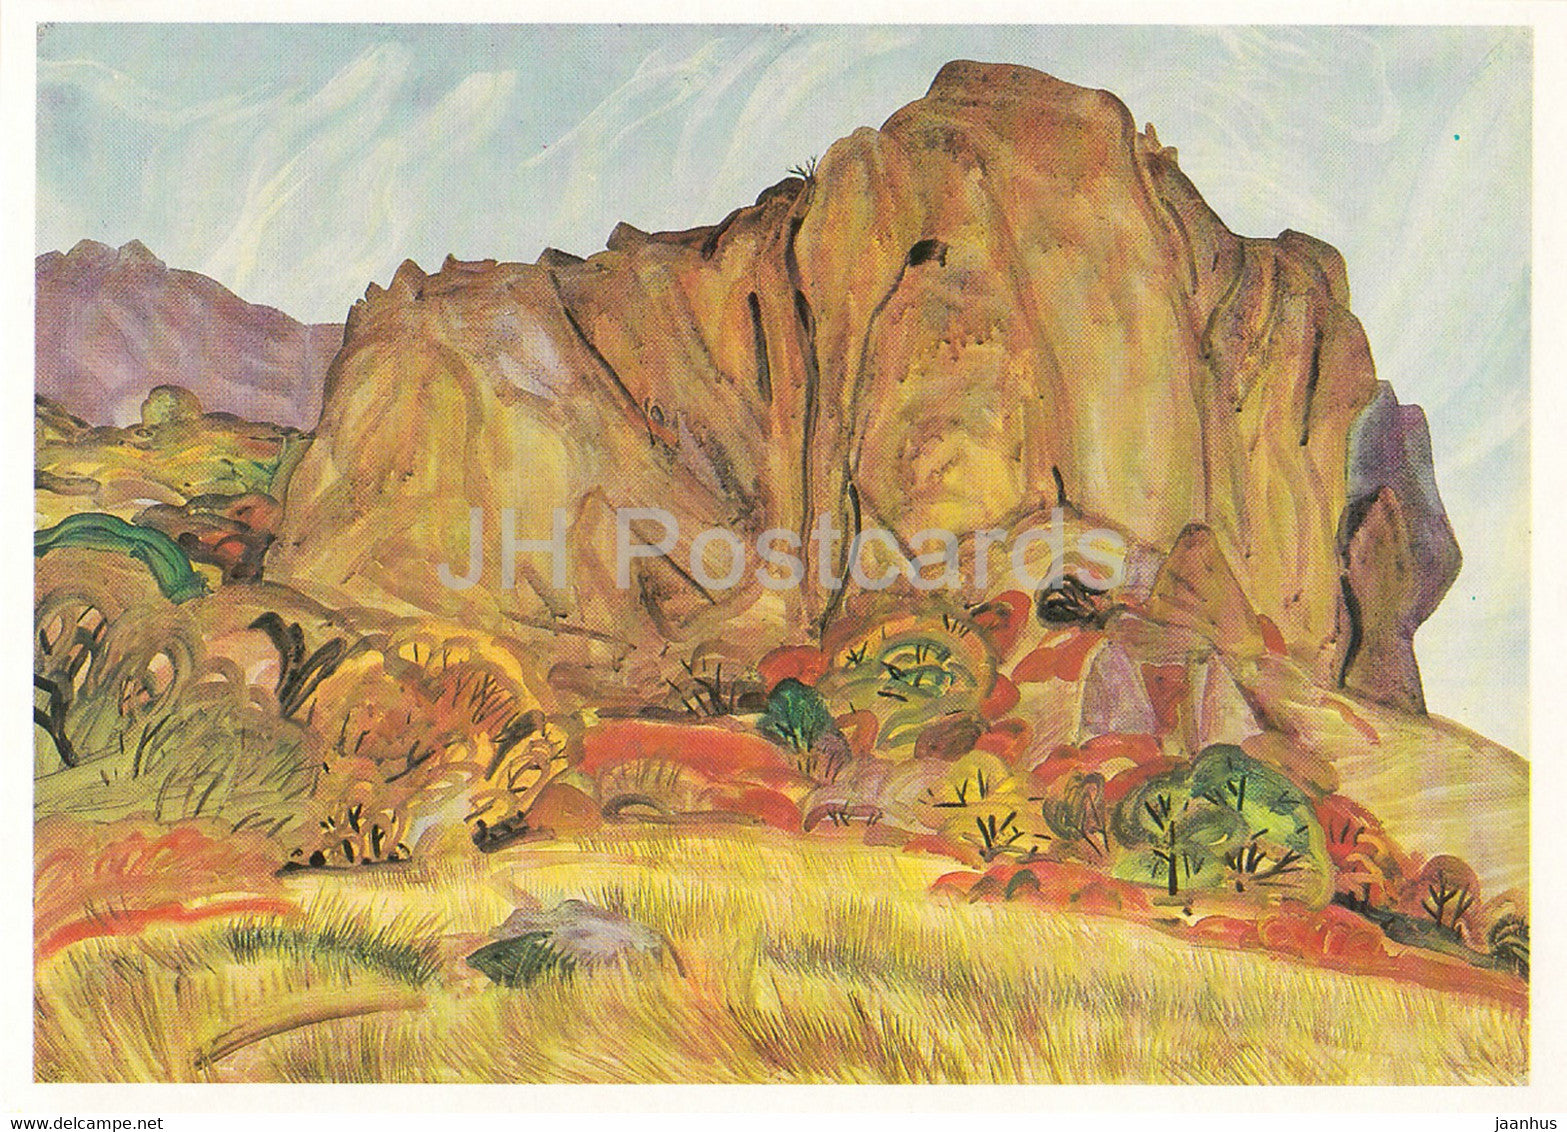 painting by G. Efimochkin - Koktebel - Road to the Mountain - Russian art - 1989 - Russia USSR - unused - JH Postcards